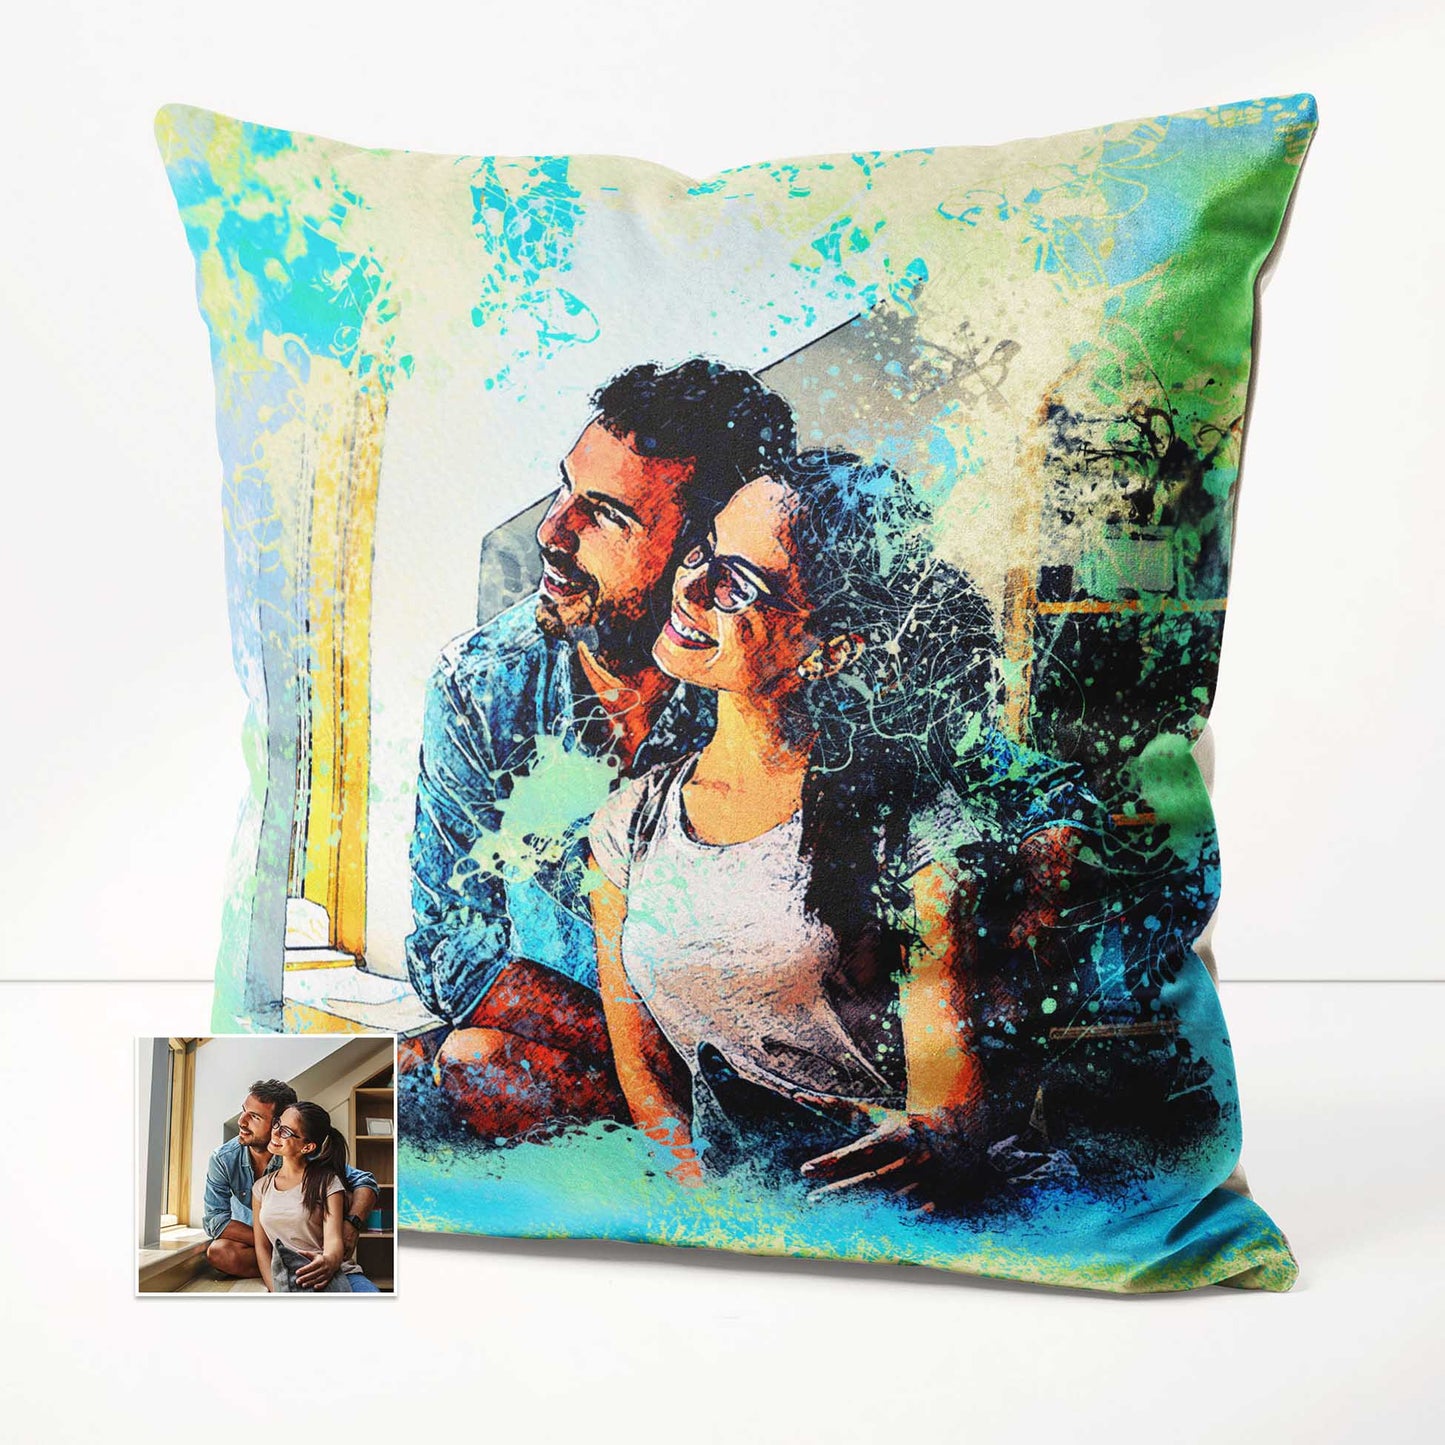 Add a splash of creativity to your space with the Personalised Watercolor Splash Cushion. Its cosy and inviting feel beckons you to relax and unwind. The vibrant and exciting watercolor print, combined with the option to personalise it 